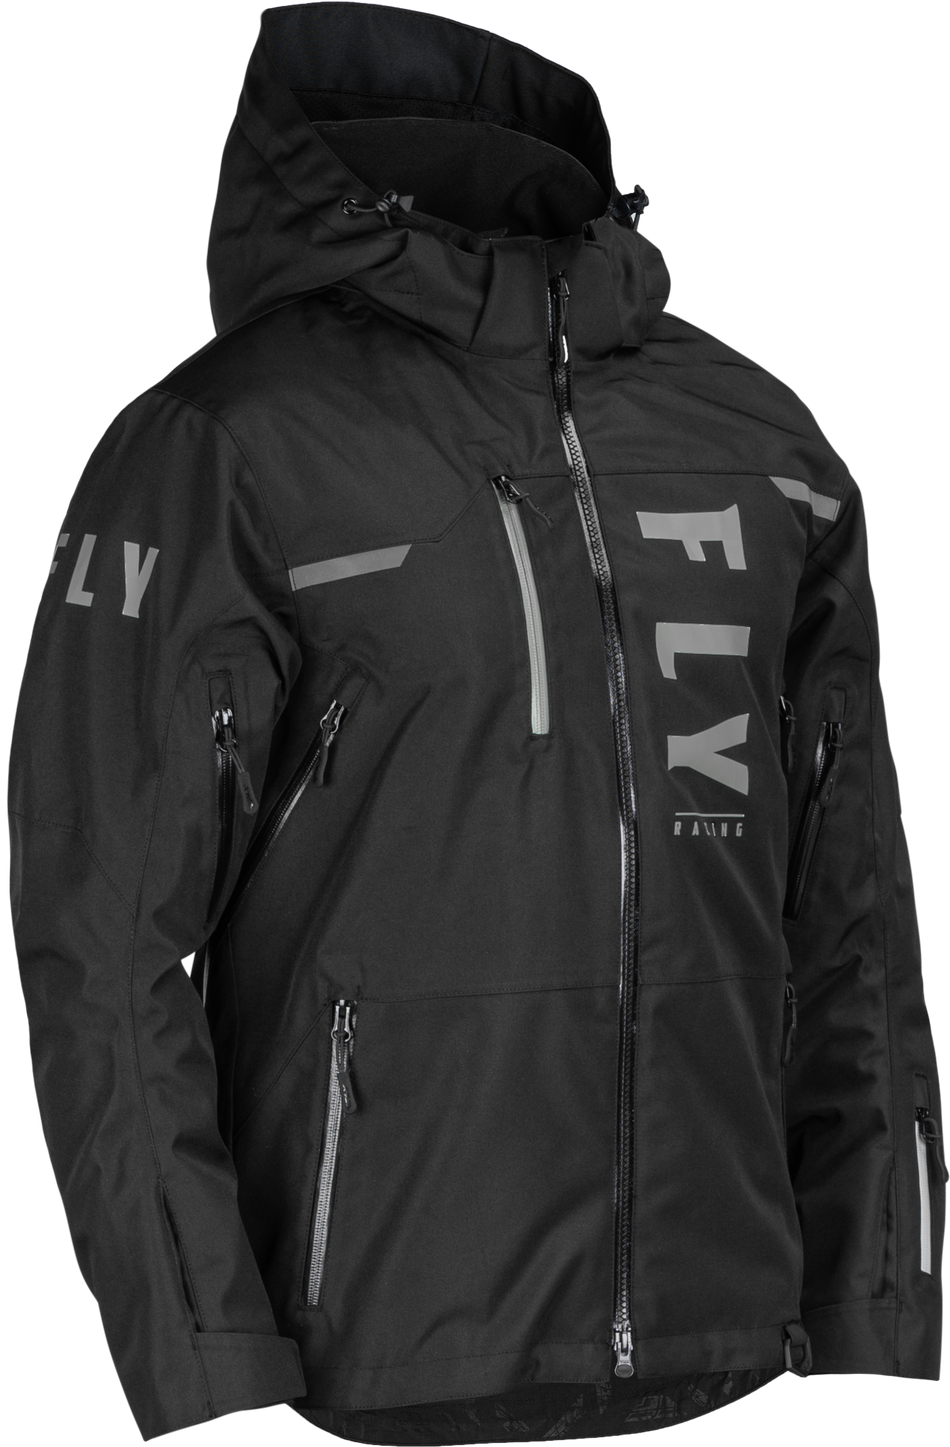 FLY RACING Carbon Jacket Black Md 470-5200M